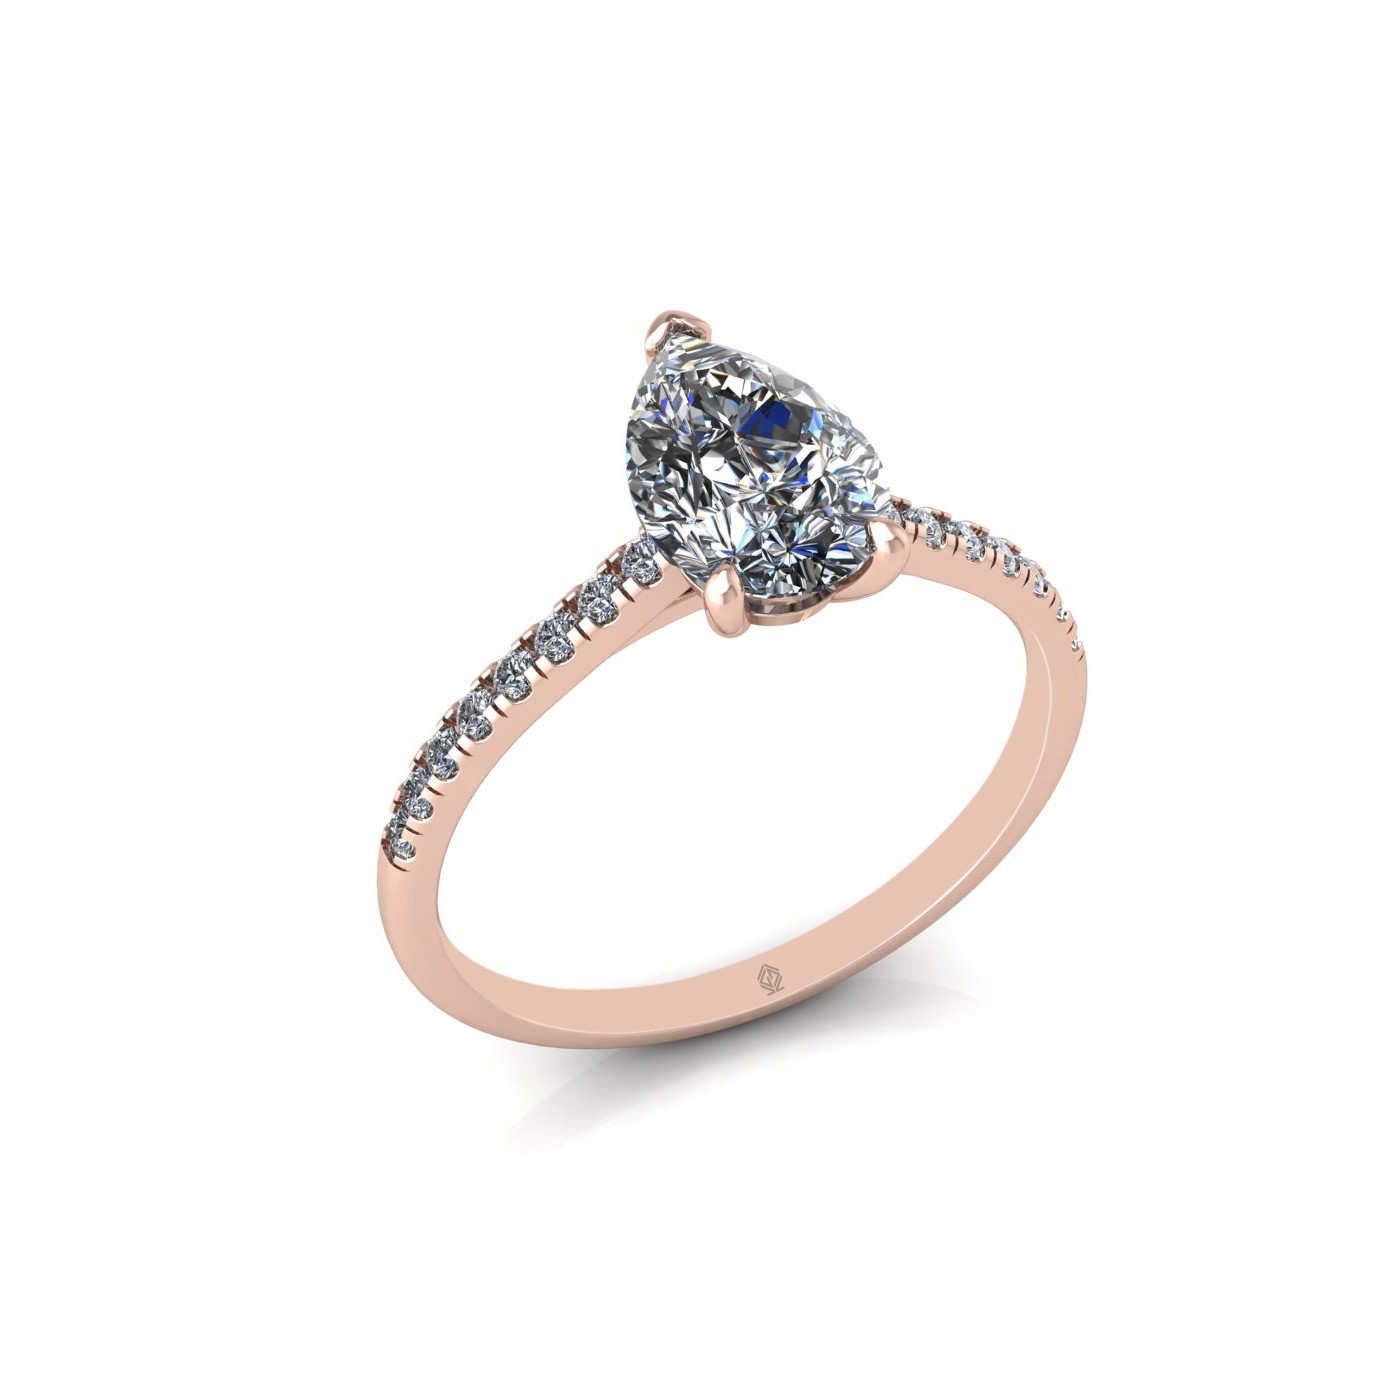 18k rose gold 1,20 ct 3 prongs pear cut diamond engagement ring with whisper thin pavÉ set band